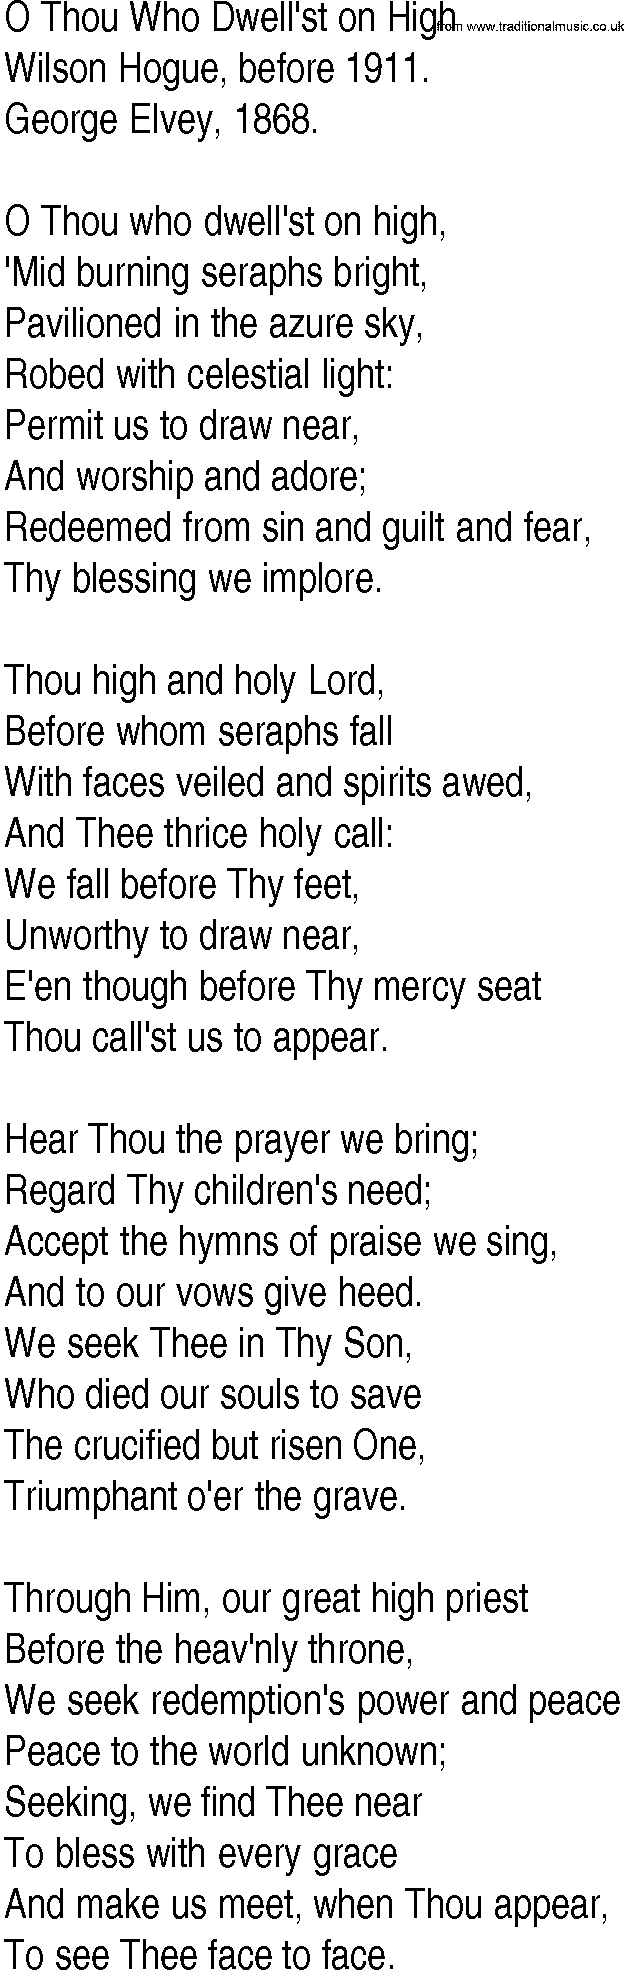 Hymn and Gospel Song: O Thou Who Dwell'st on High by Wilson Hogue before lyrics